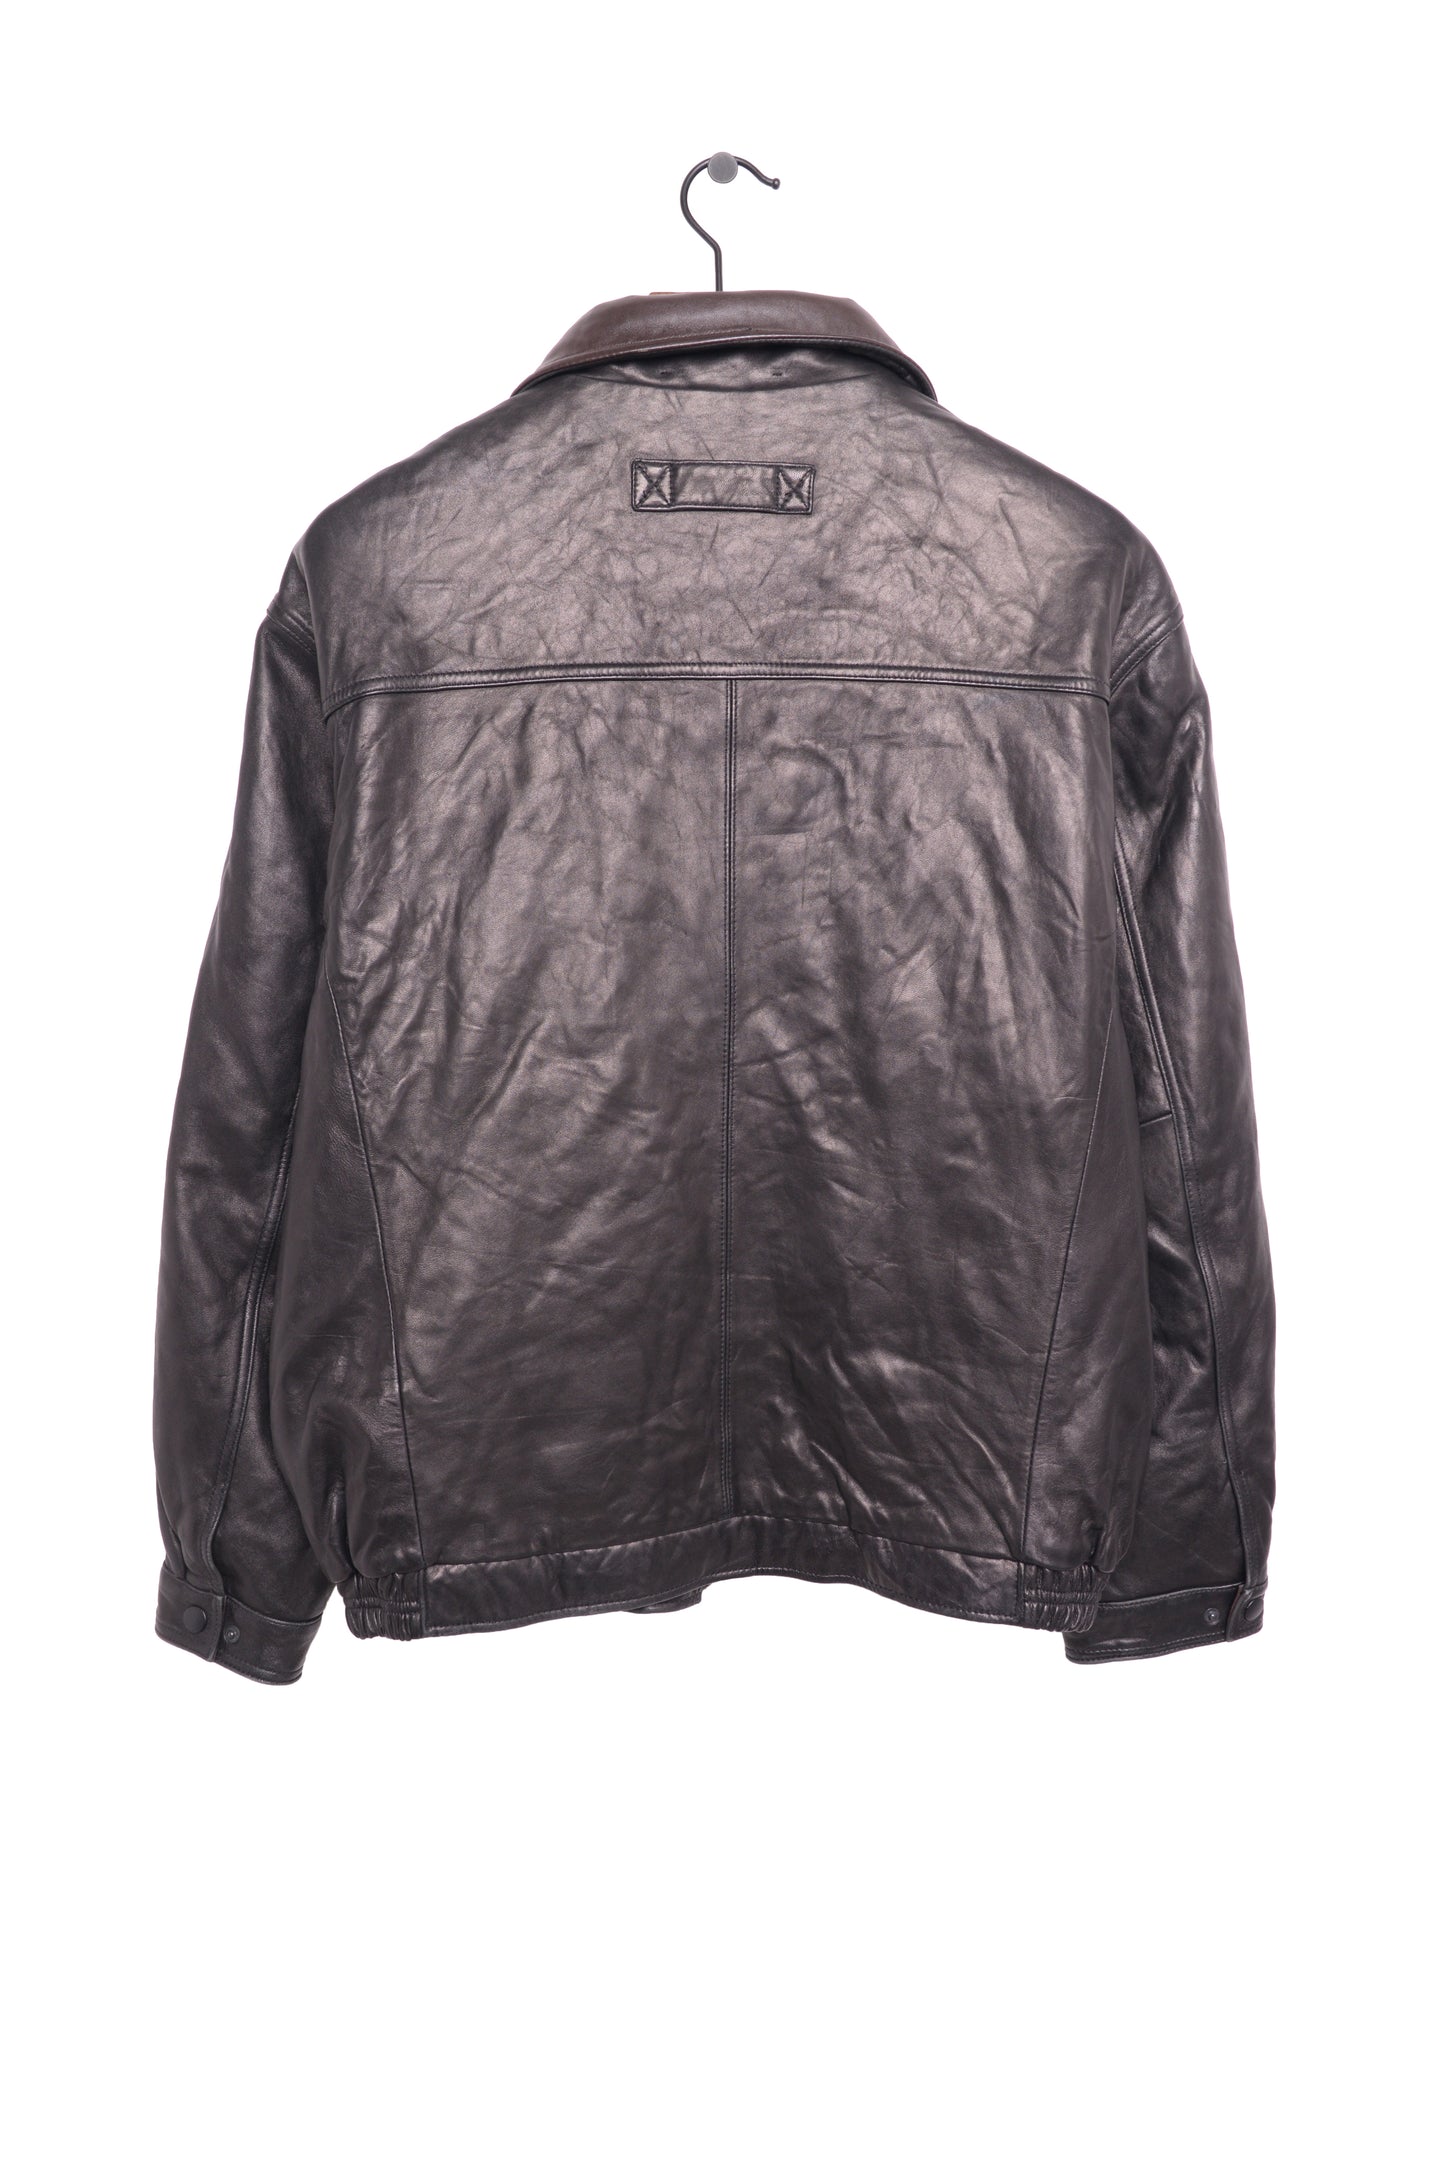 1990s Soft Chocolate Leather Bomber